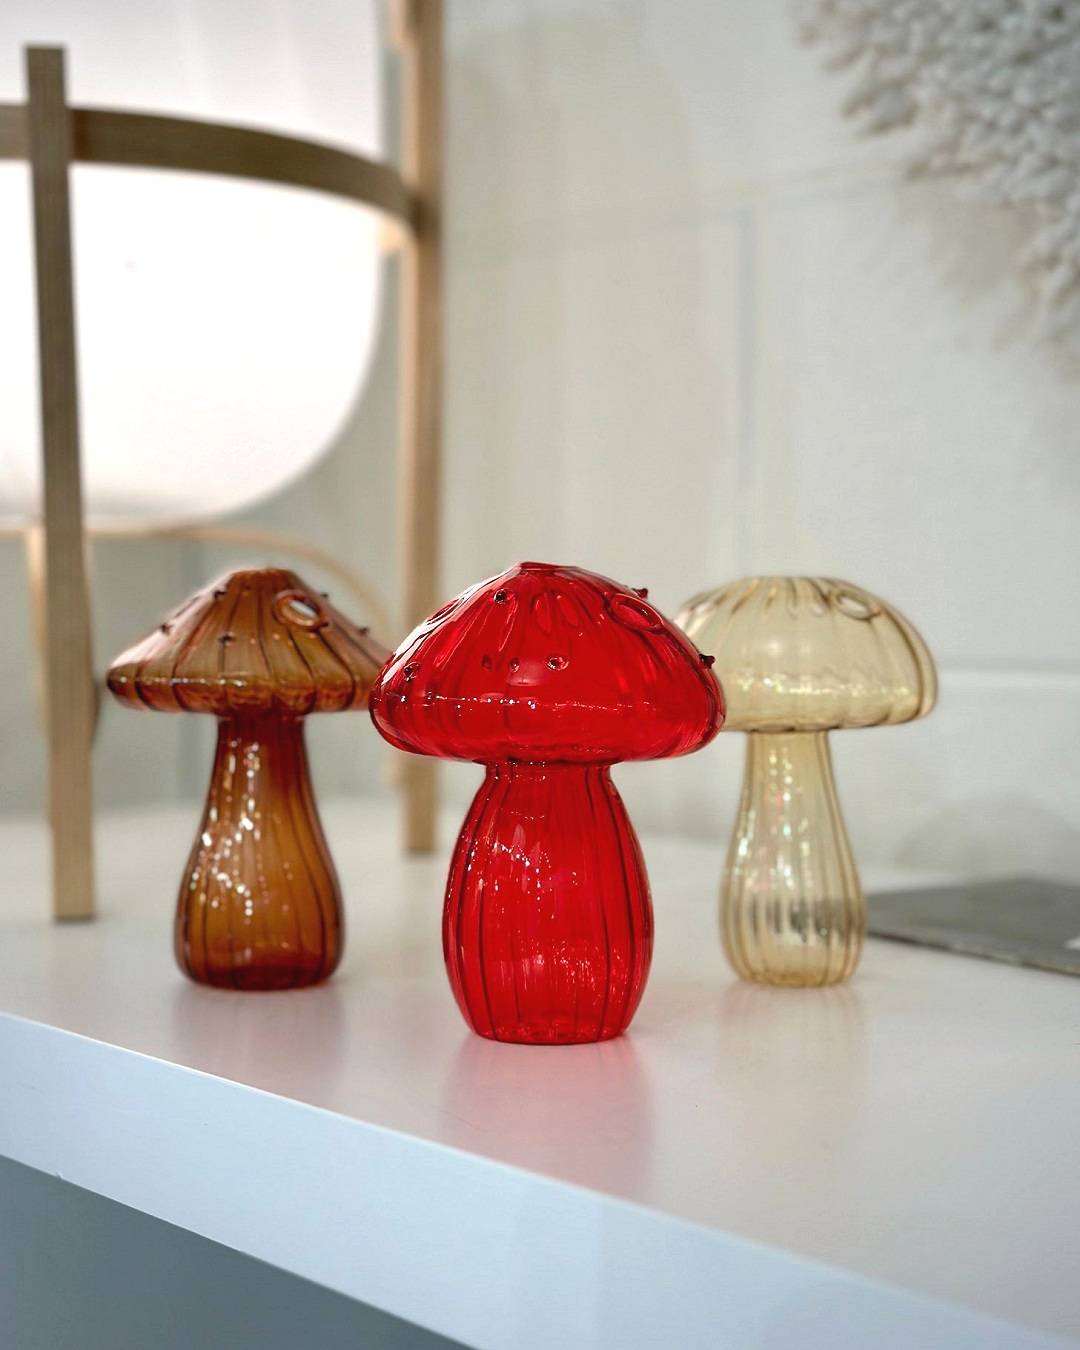 Mushroom vases in brown amber and red